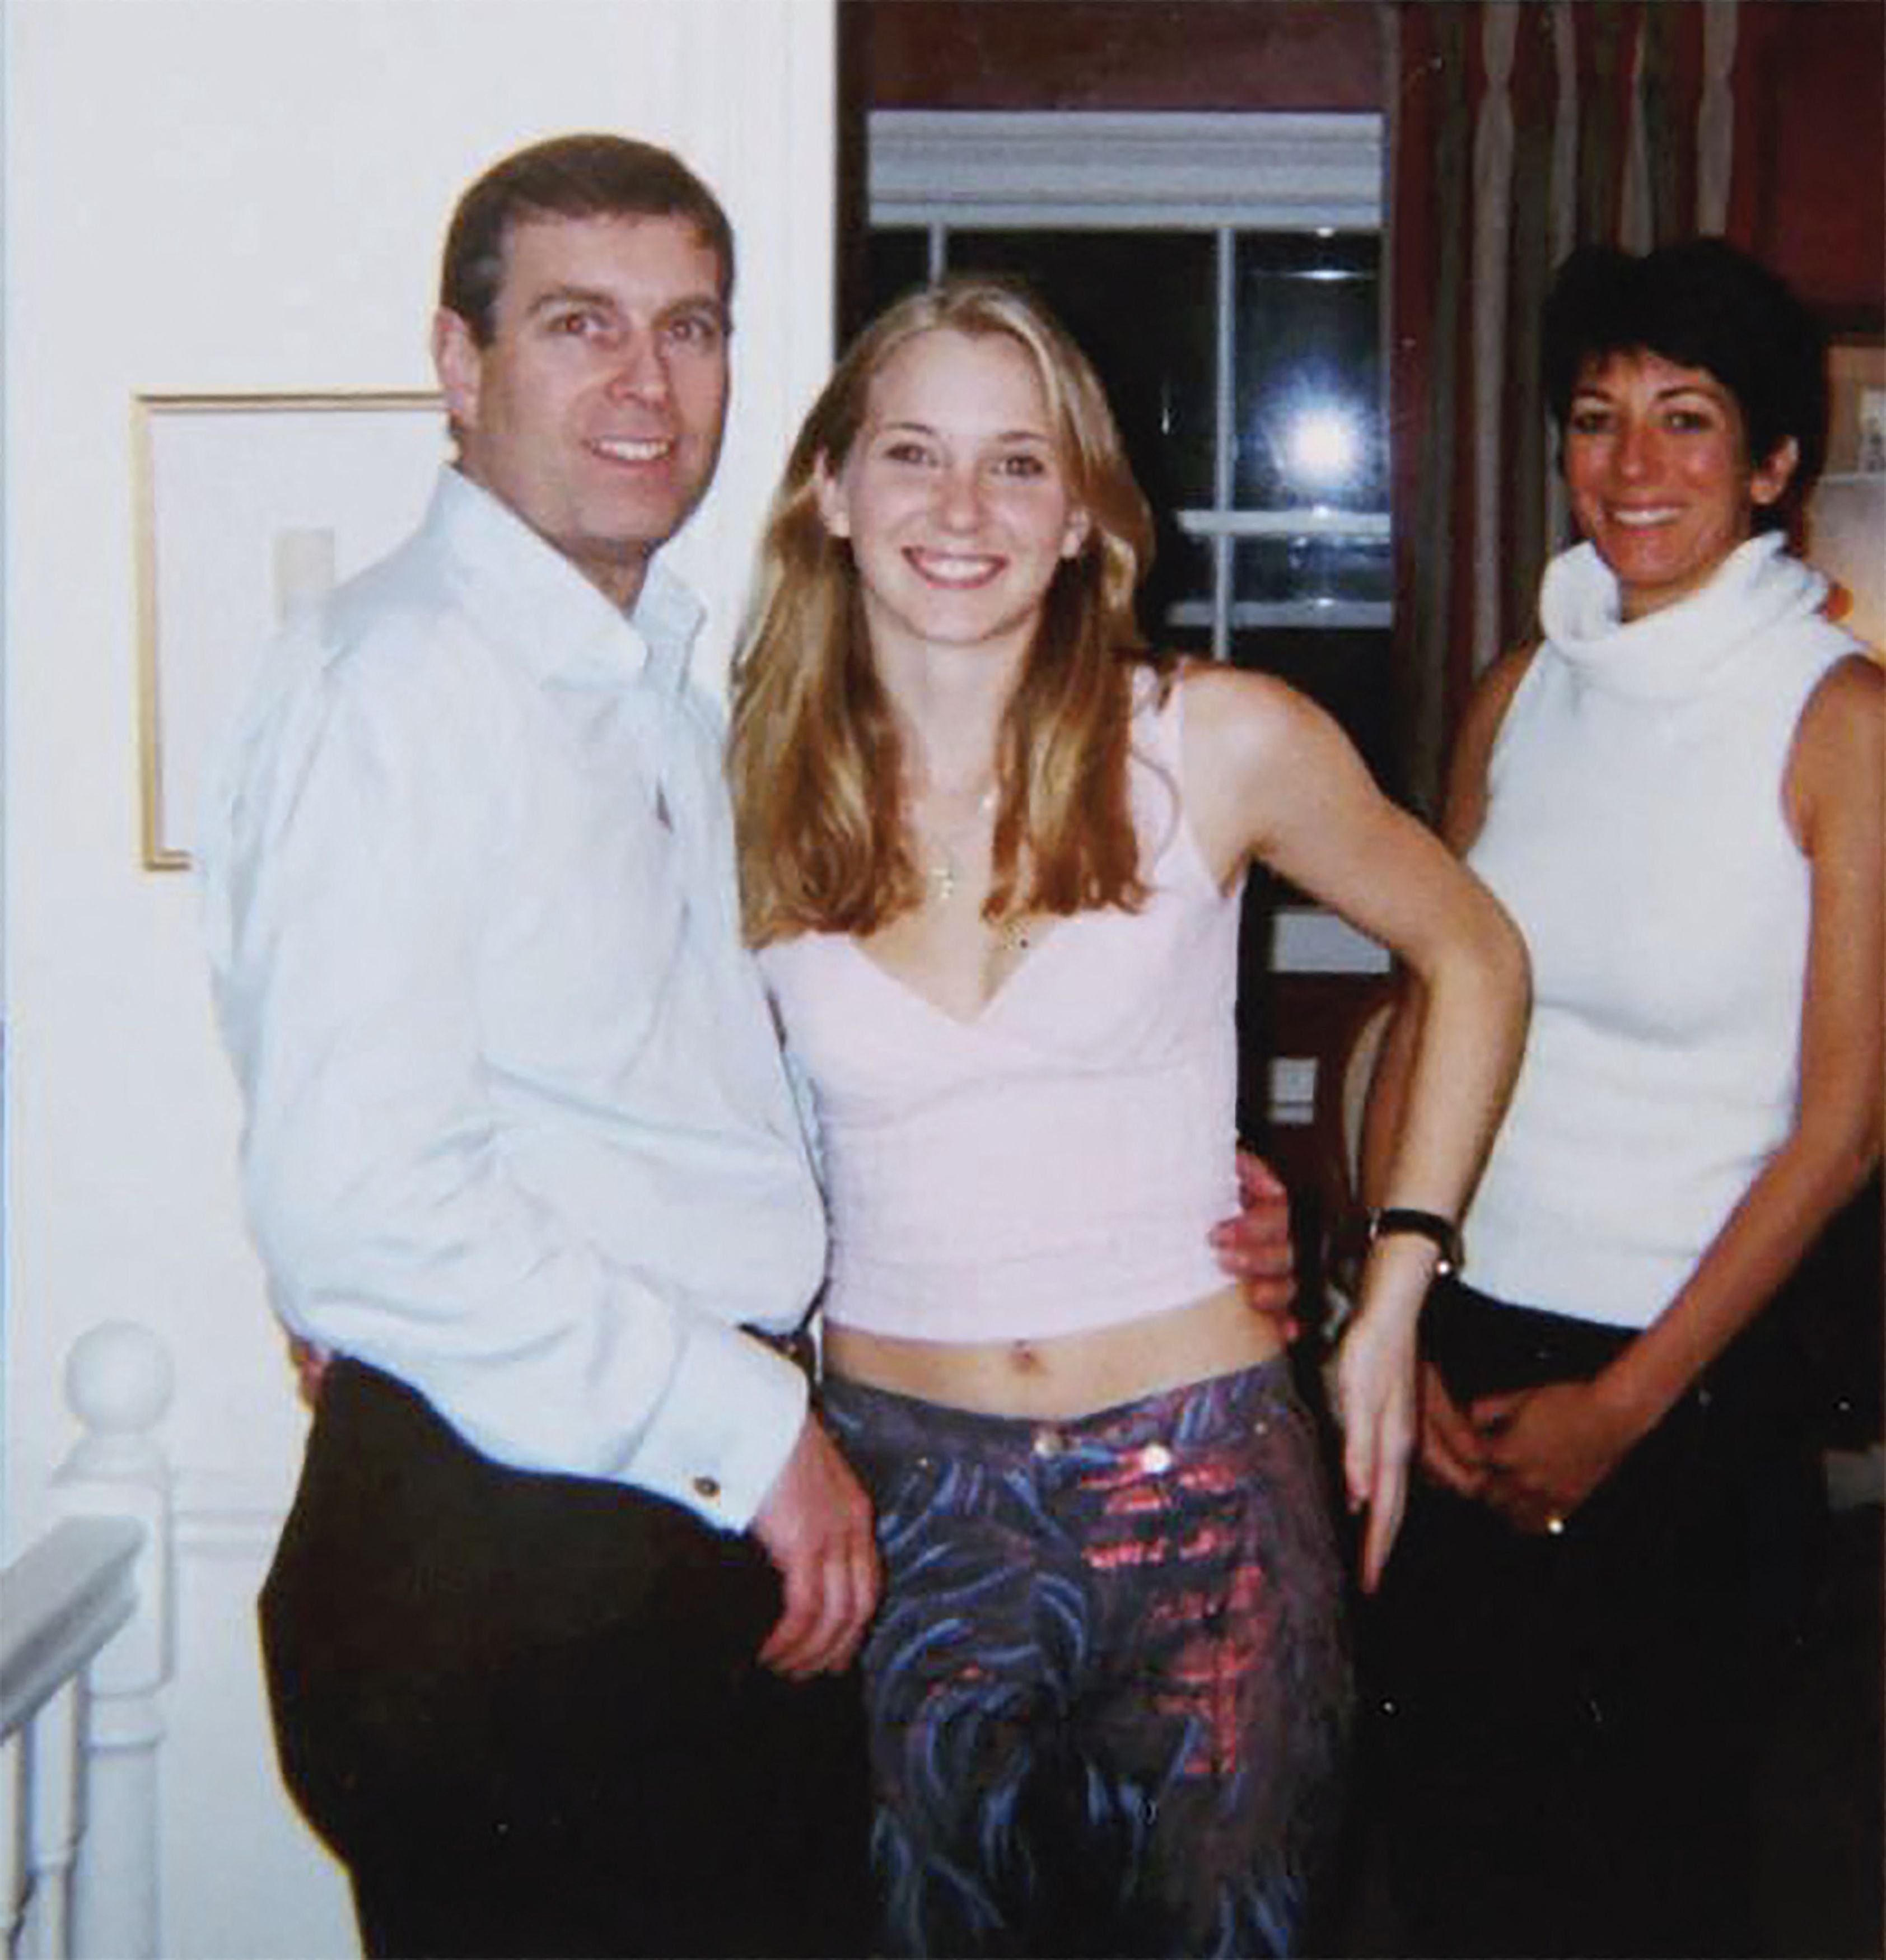 A photo allegedly showing Prince Andrew, Virginia Giuffre, and Ghislaine Maxwell